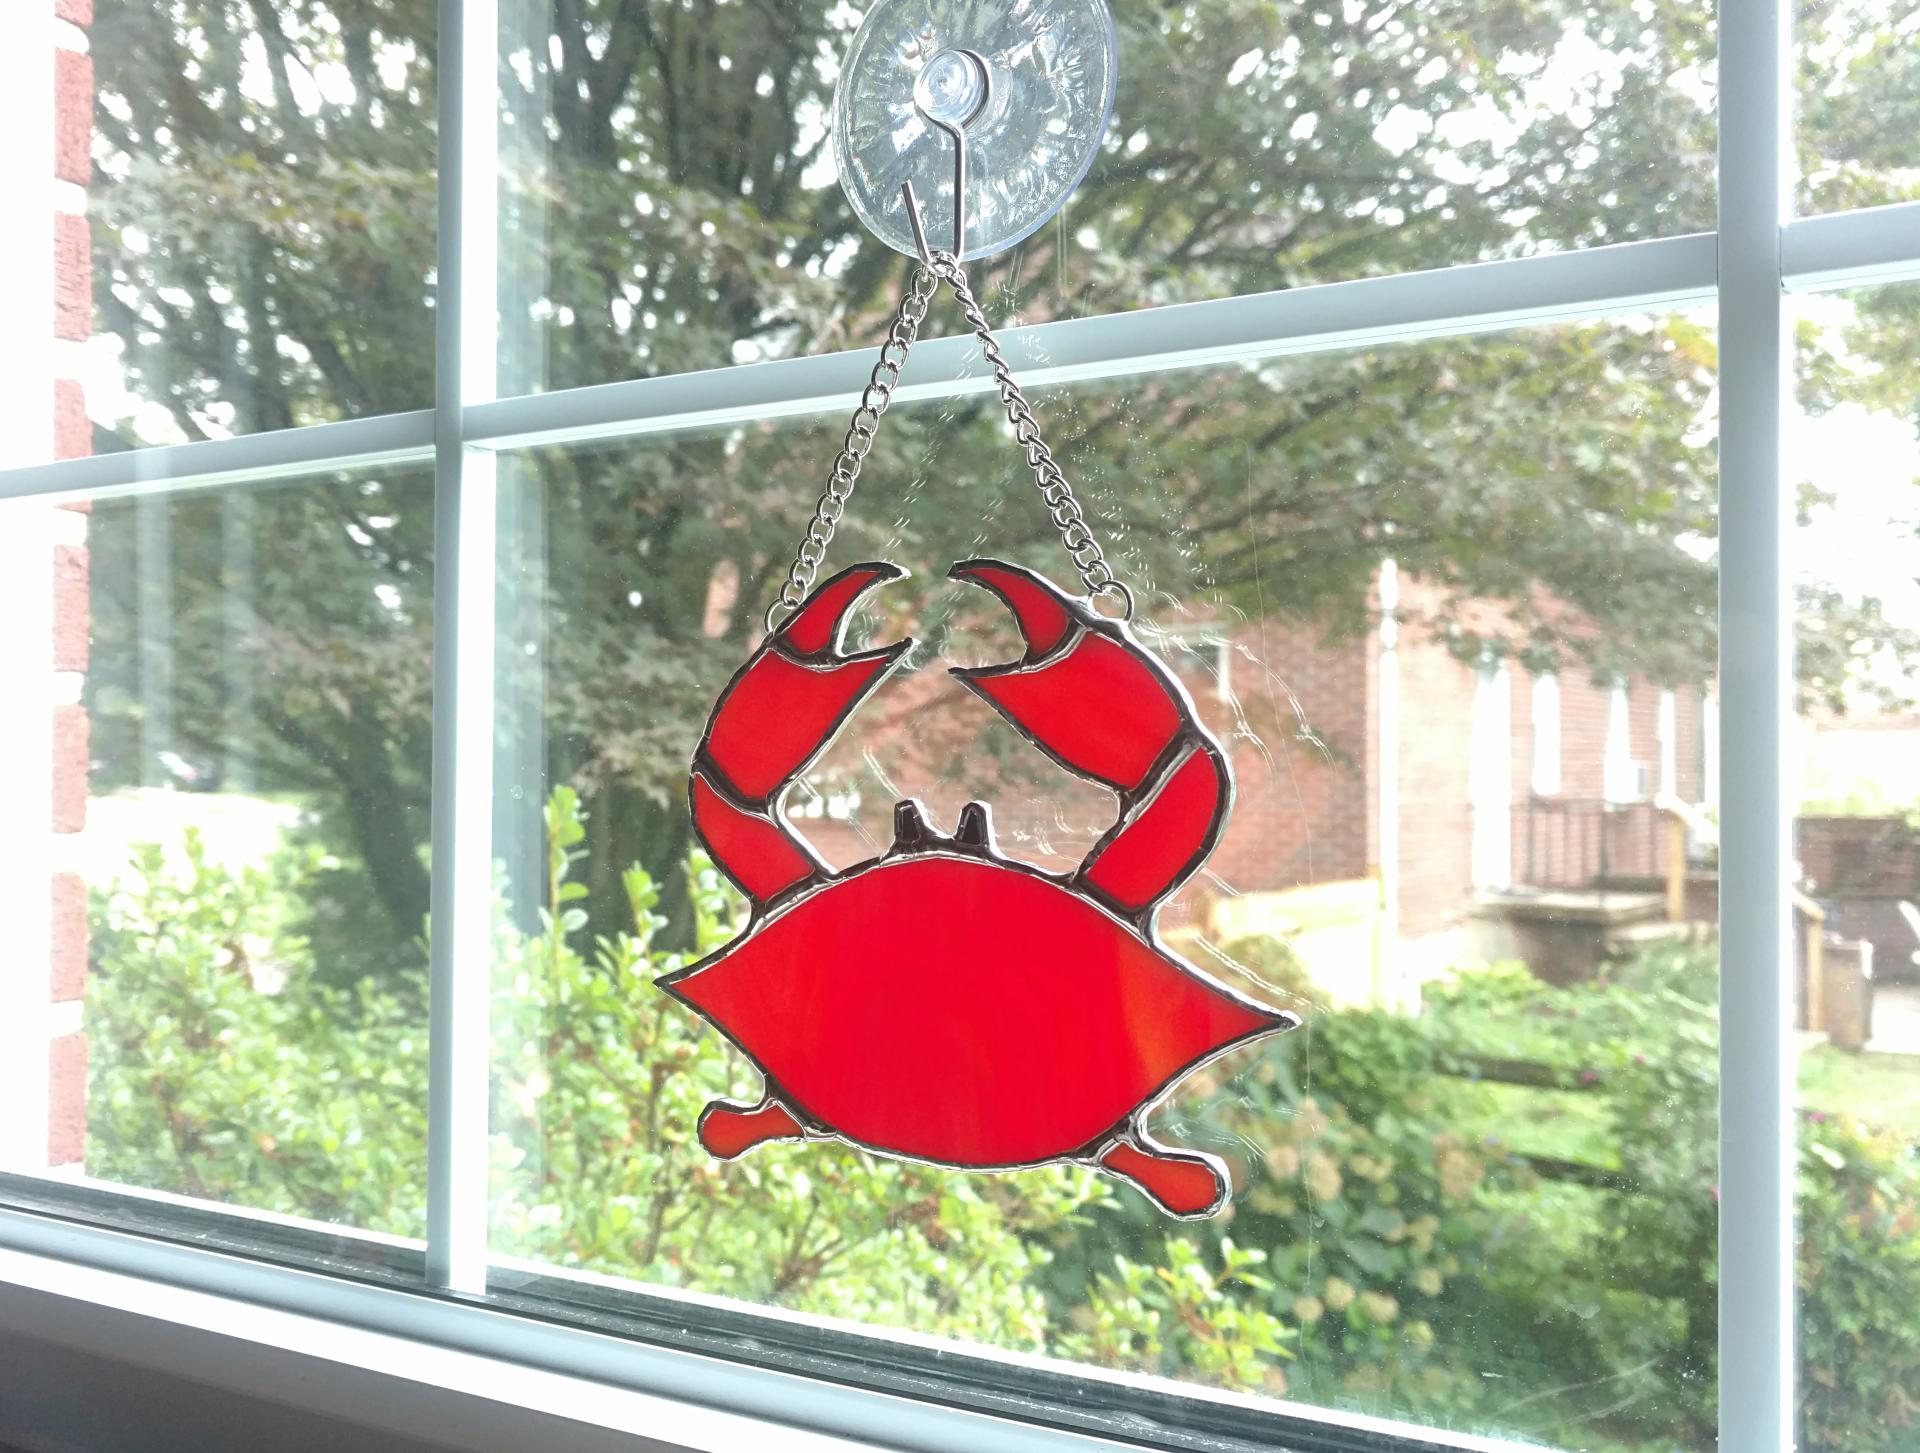 Stained Glass Crab Suncatcher